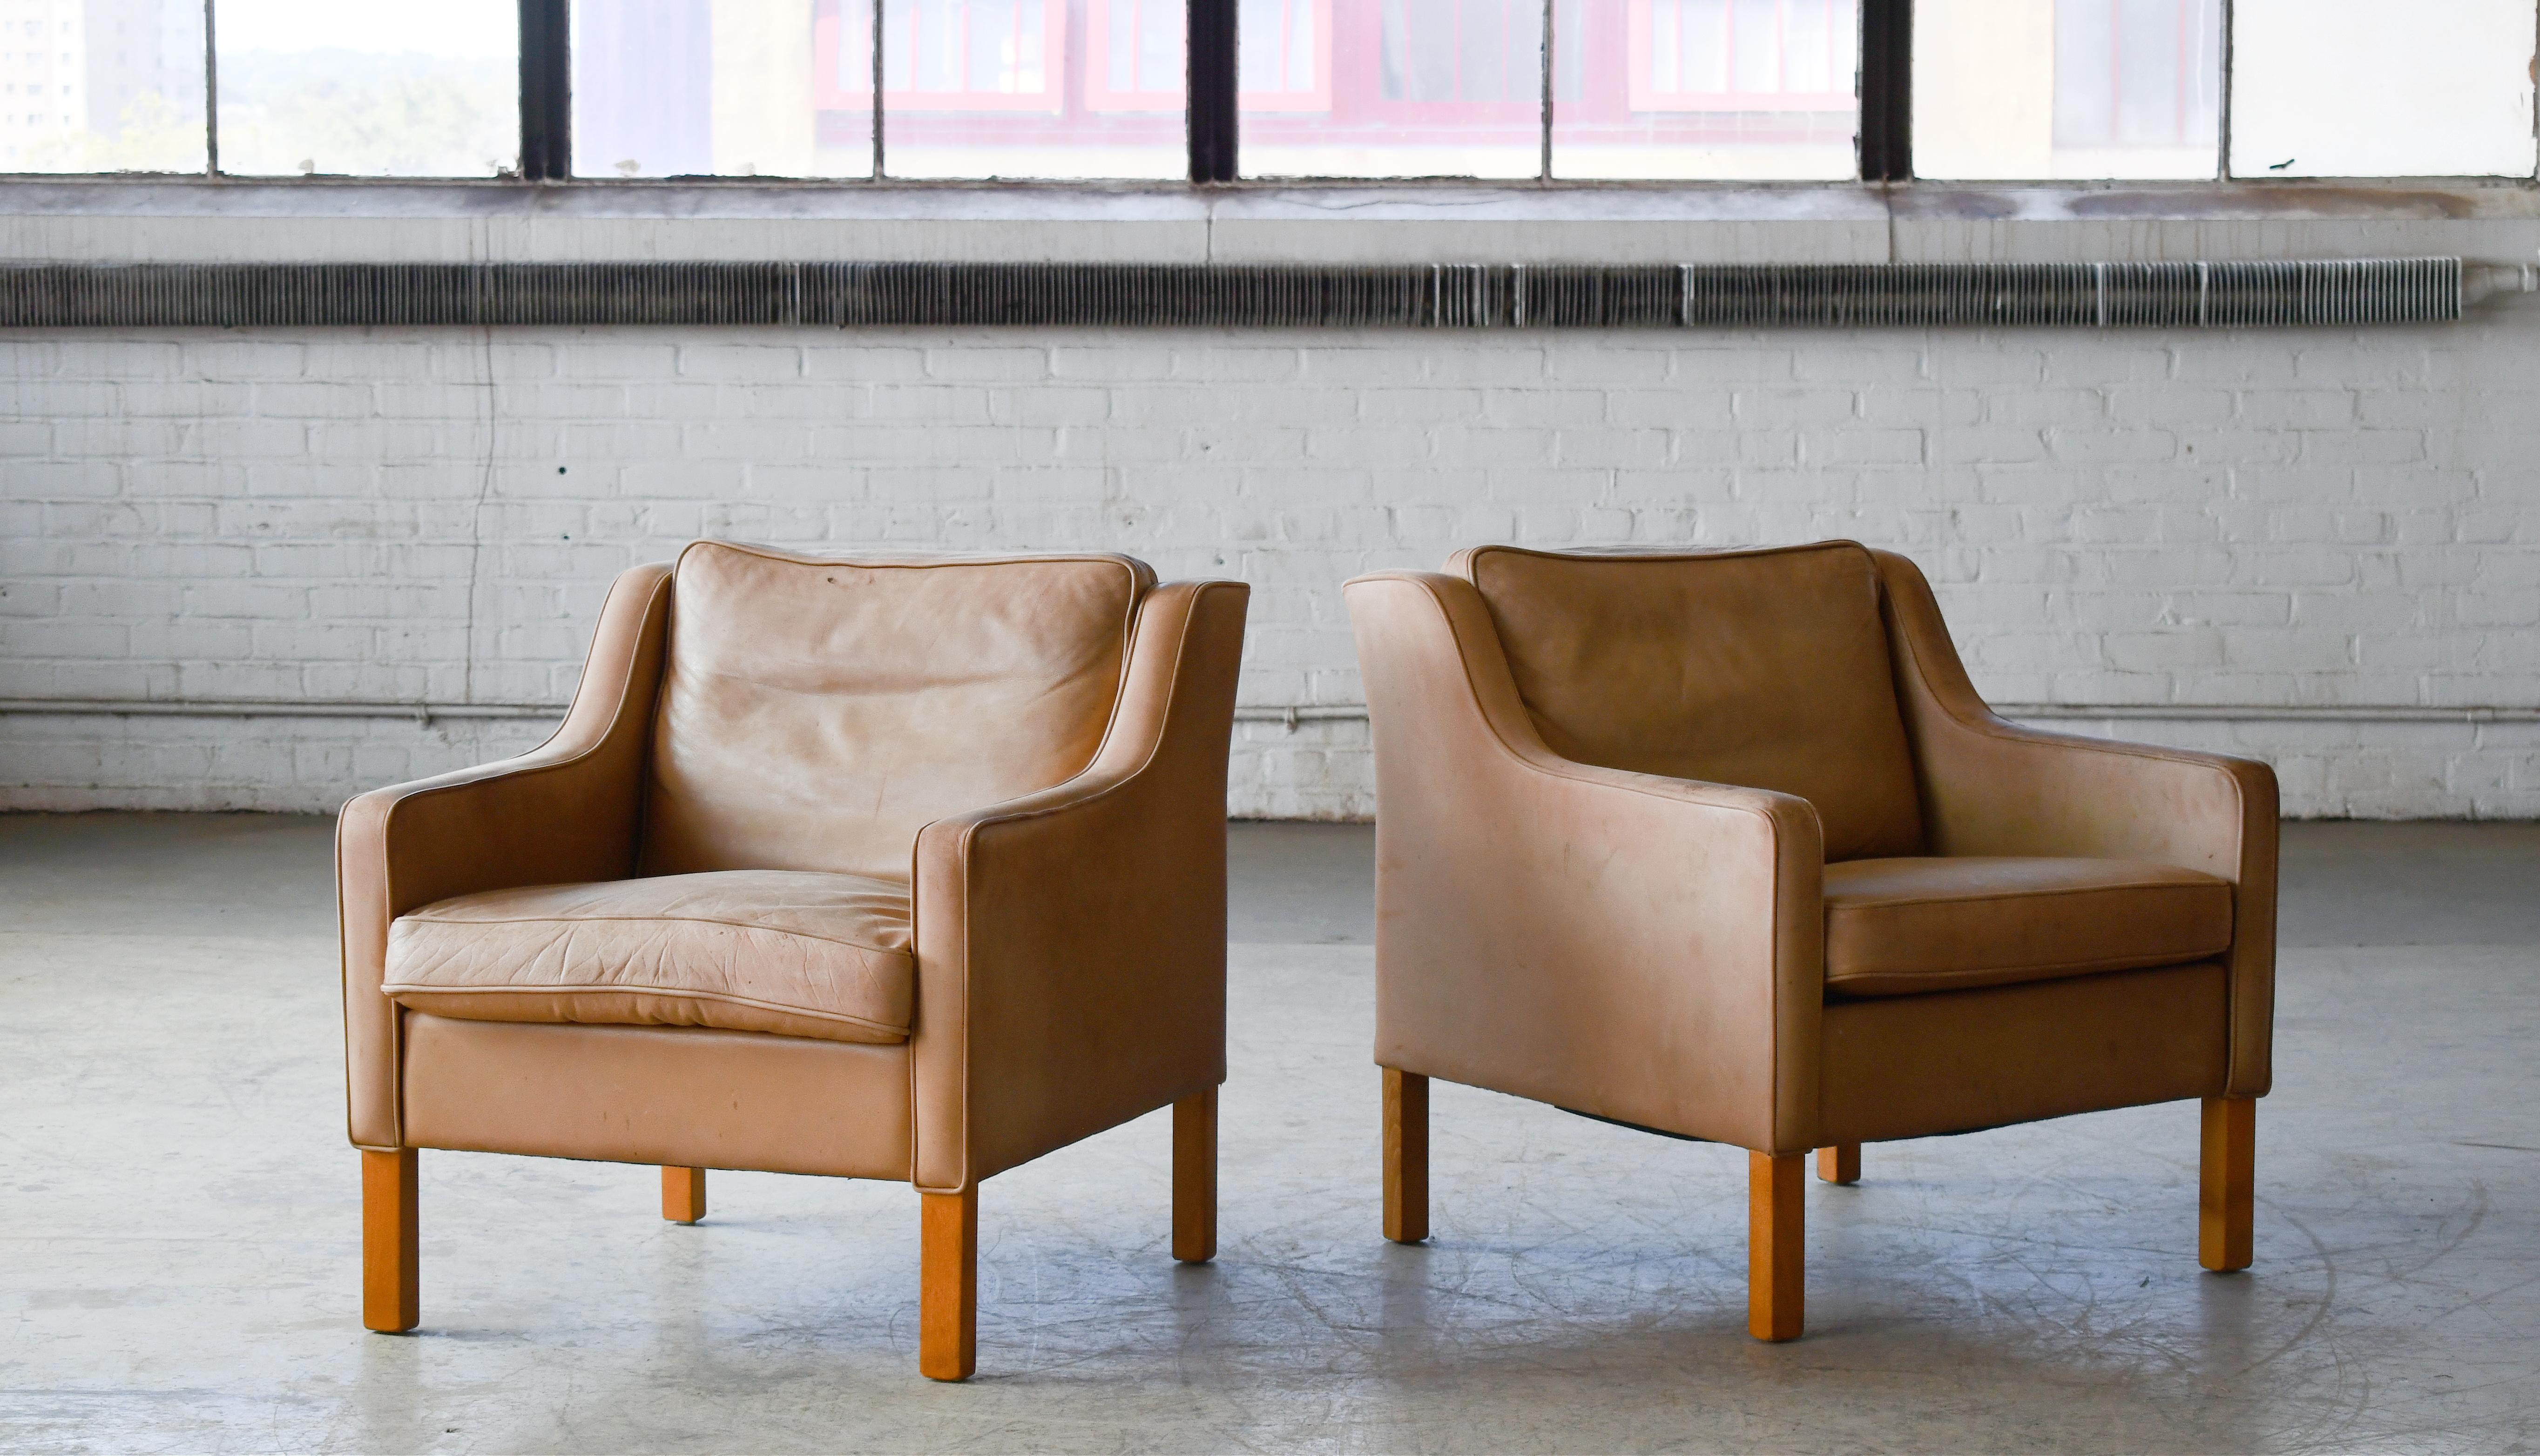 Stunning Børge Mogensen Style designed lounge chairs made in a supple natural vegetable tanned beige leather. Almost identical to Borge Mogensen's model 2321. One of the most elegant Classic midcentury Danish lounge chairs ever made of a design that